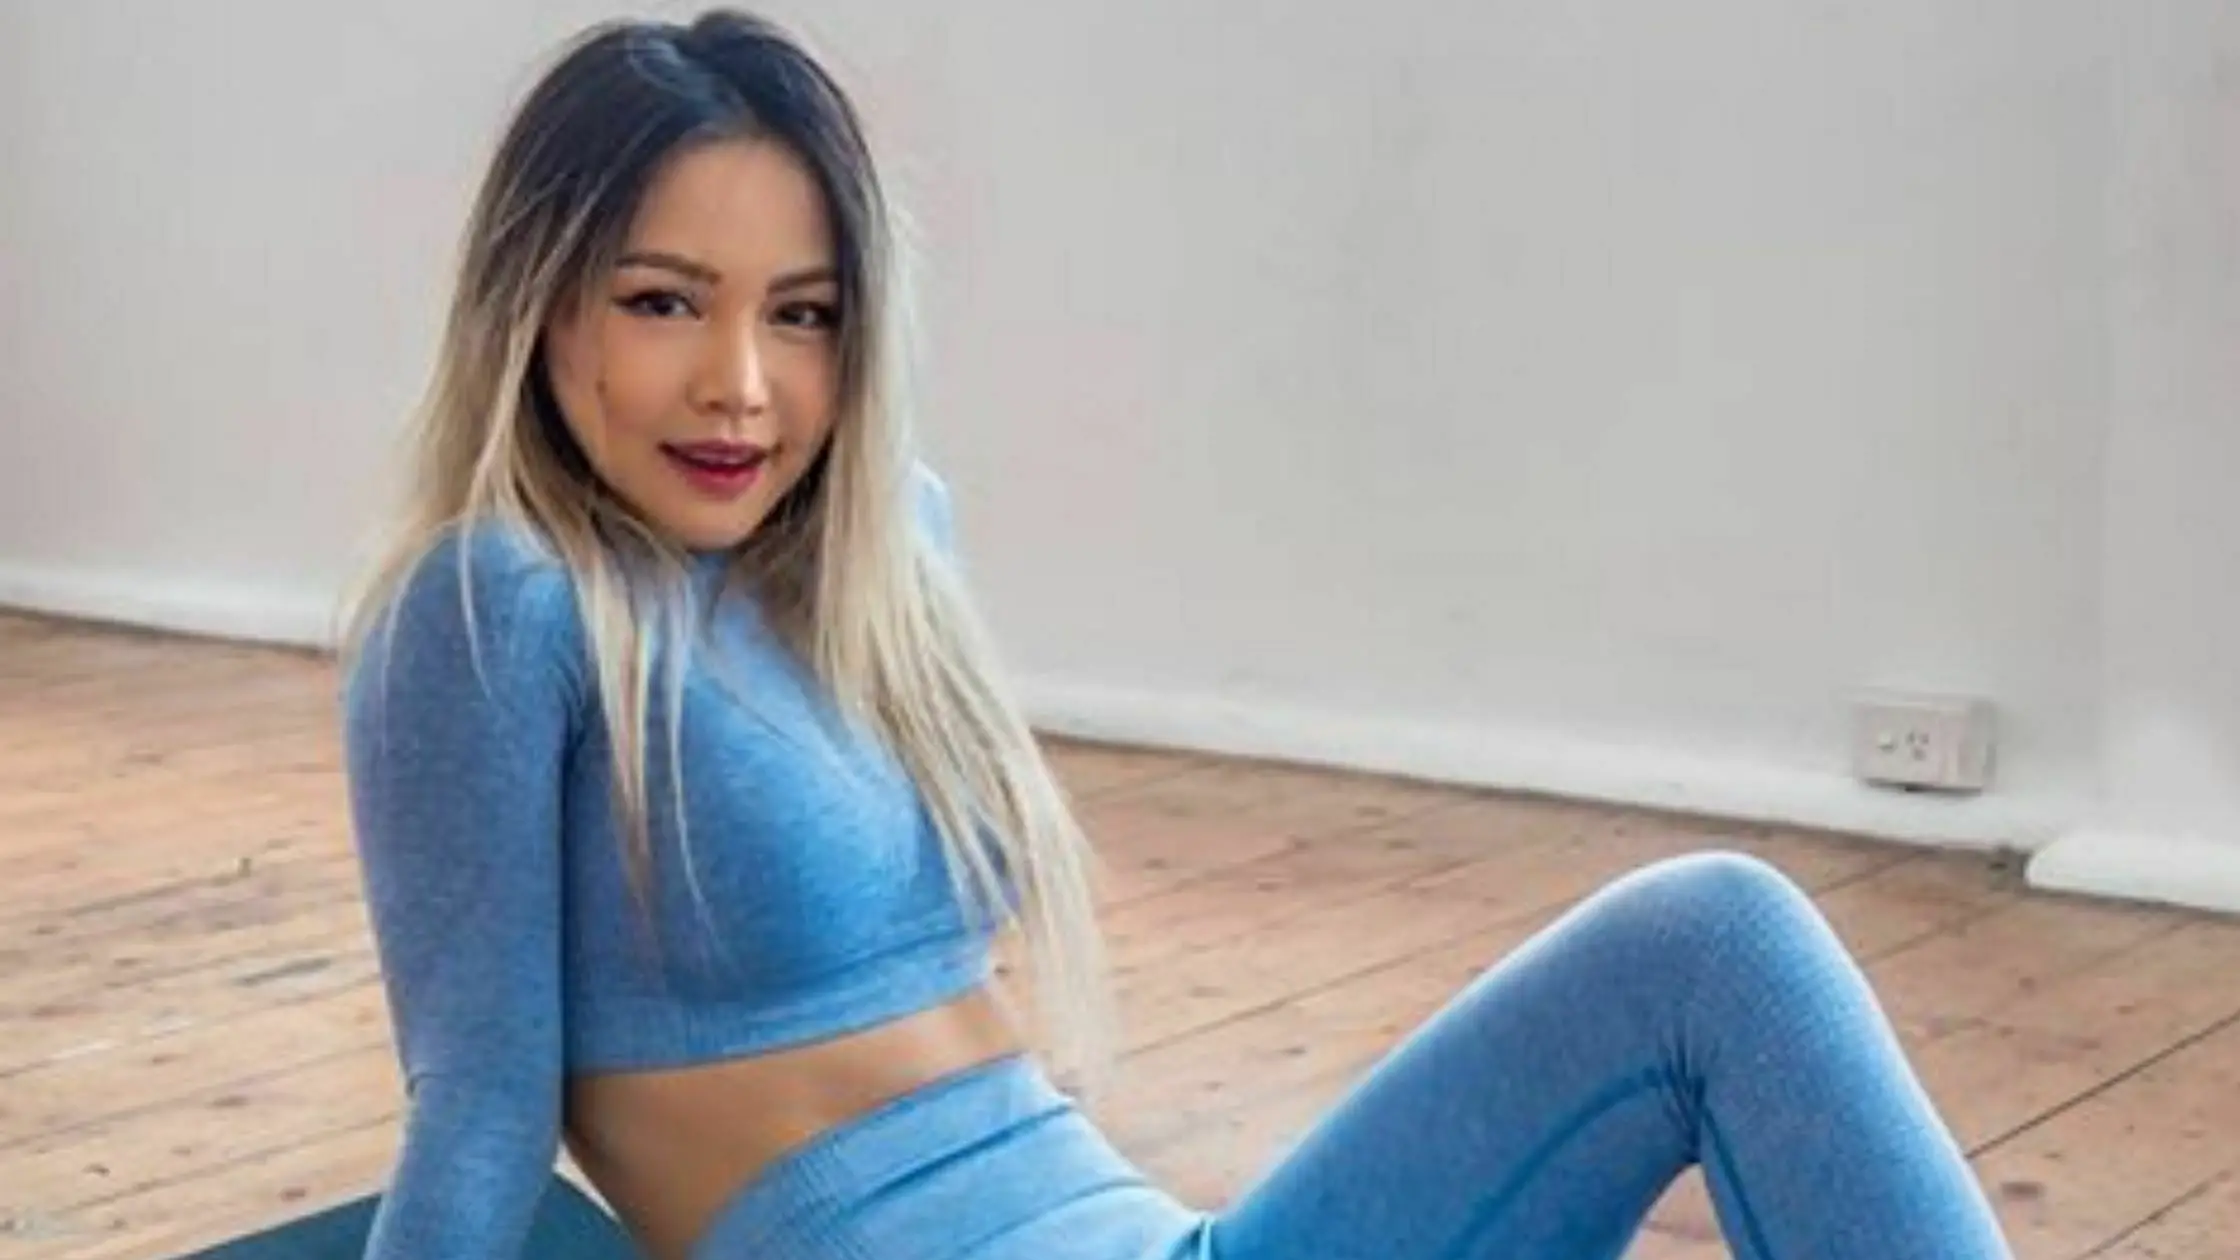 chloe-ting-scolds-gym-bros-for-mocking-her-workout-videos